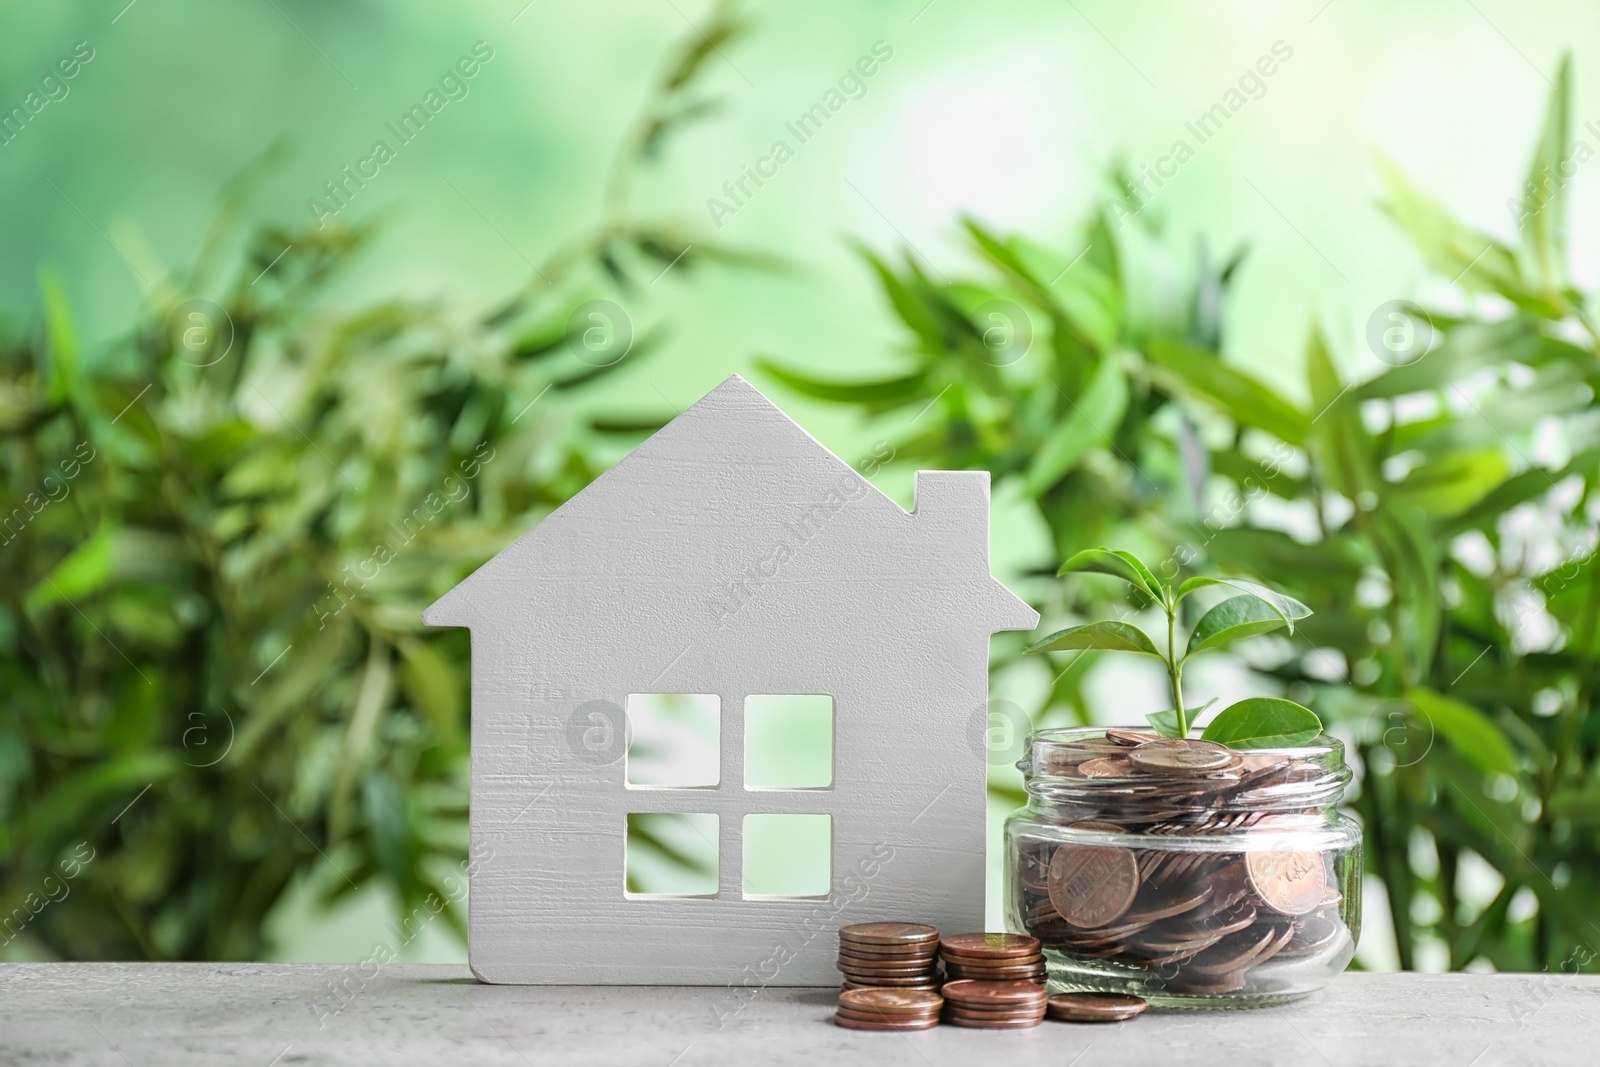 Photo of House model and jar with coins on table against blurred background. Space for text